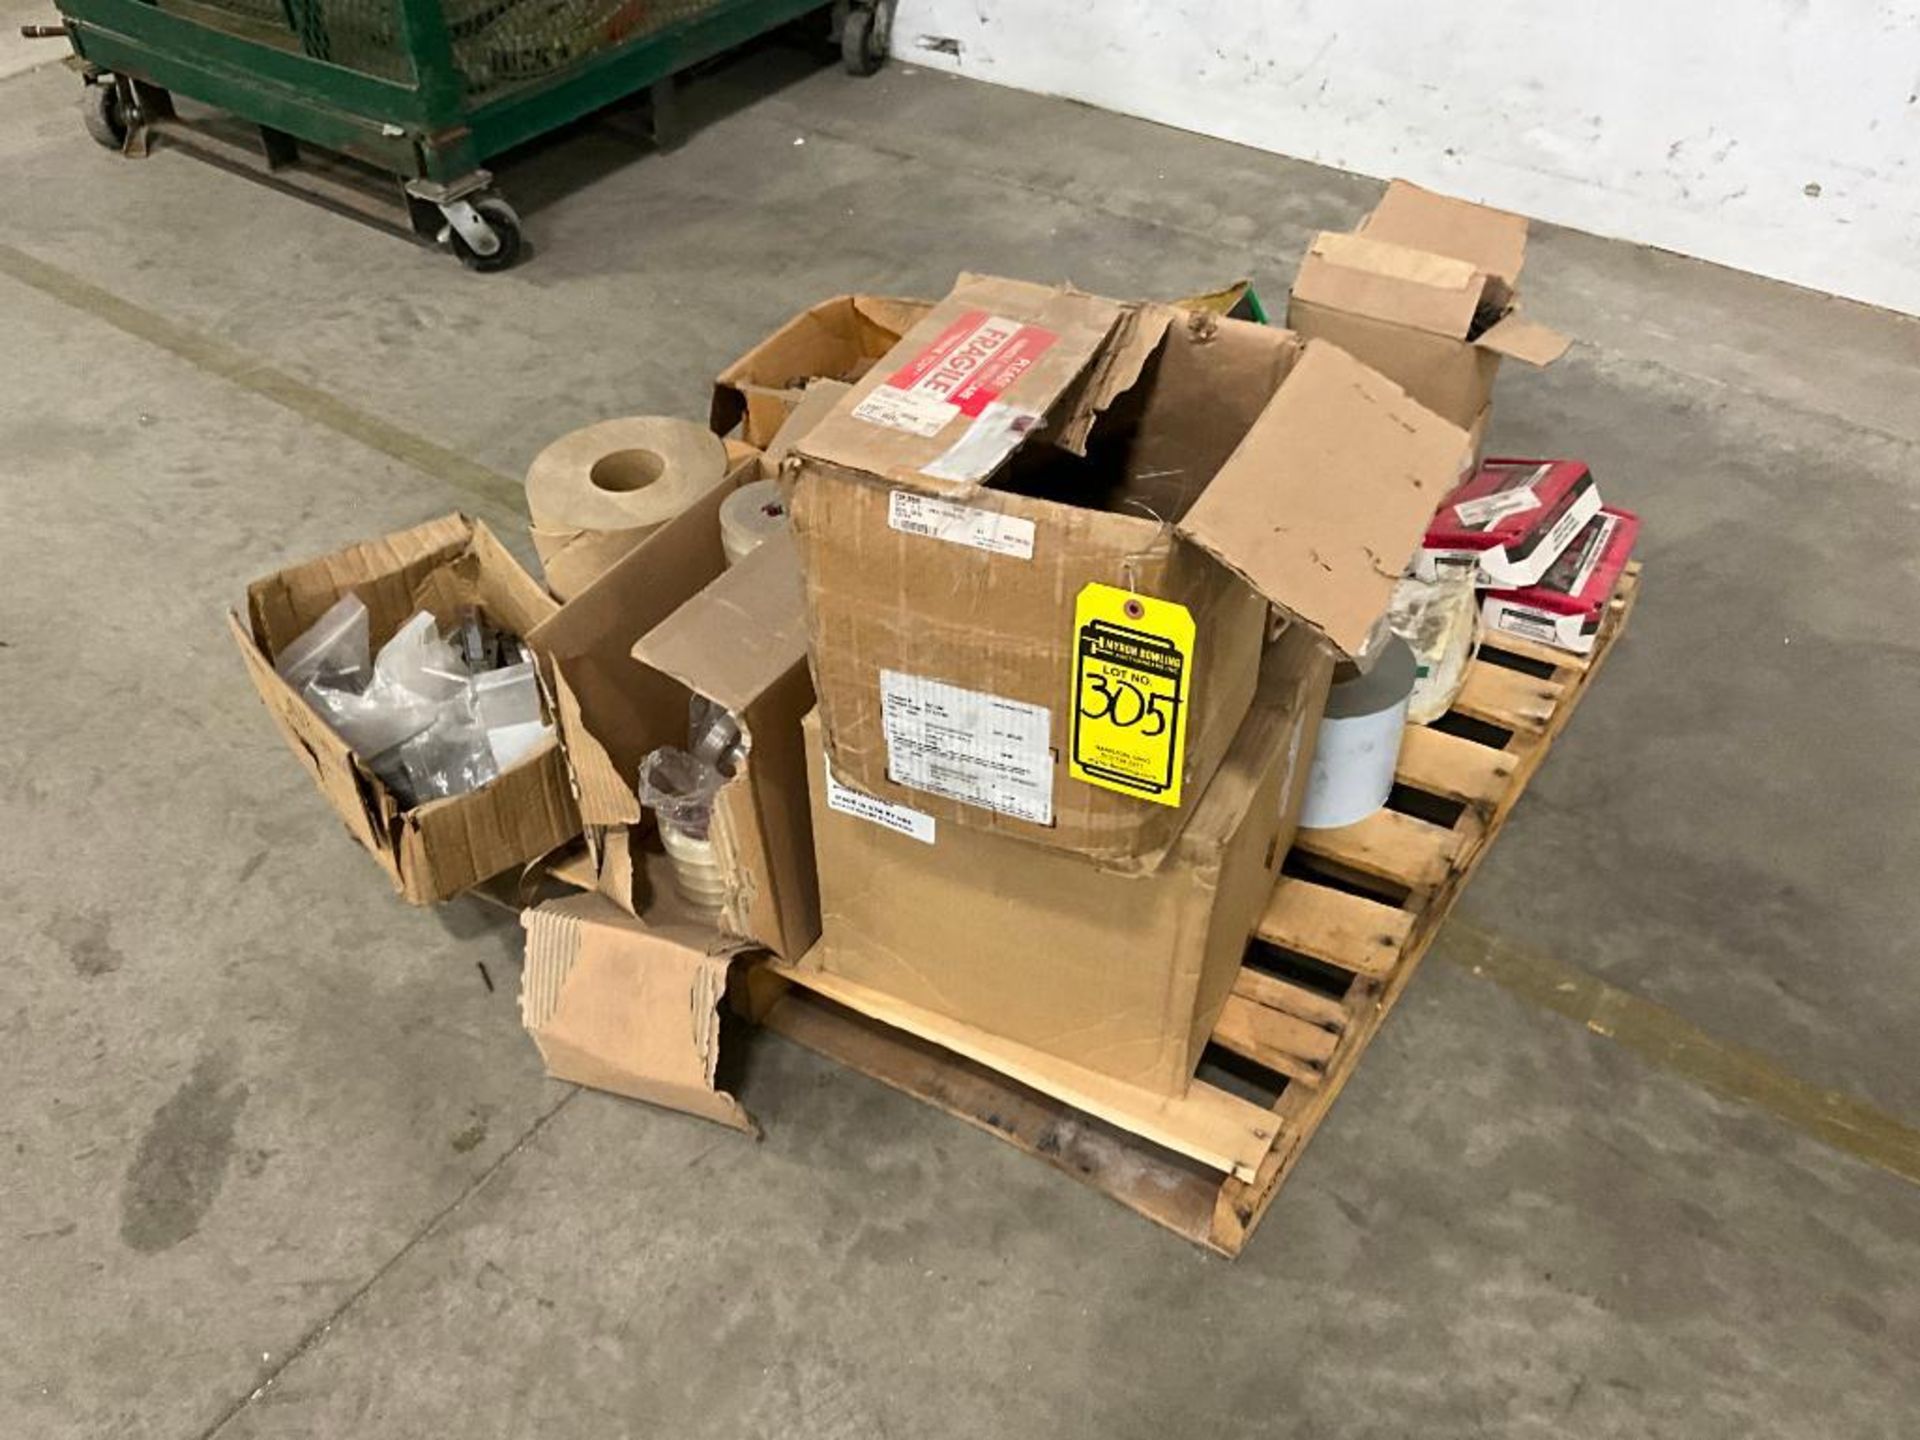 Assorted Boxes of Staples, Tape, Hardware, Concrete Anchors